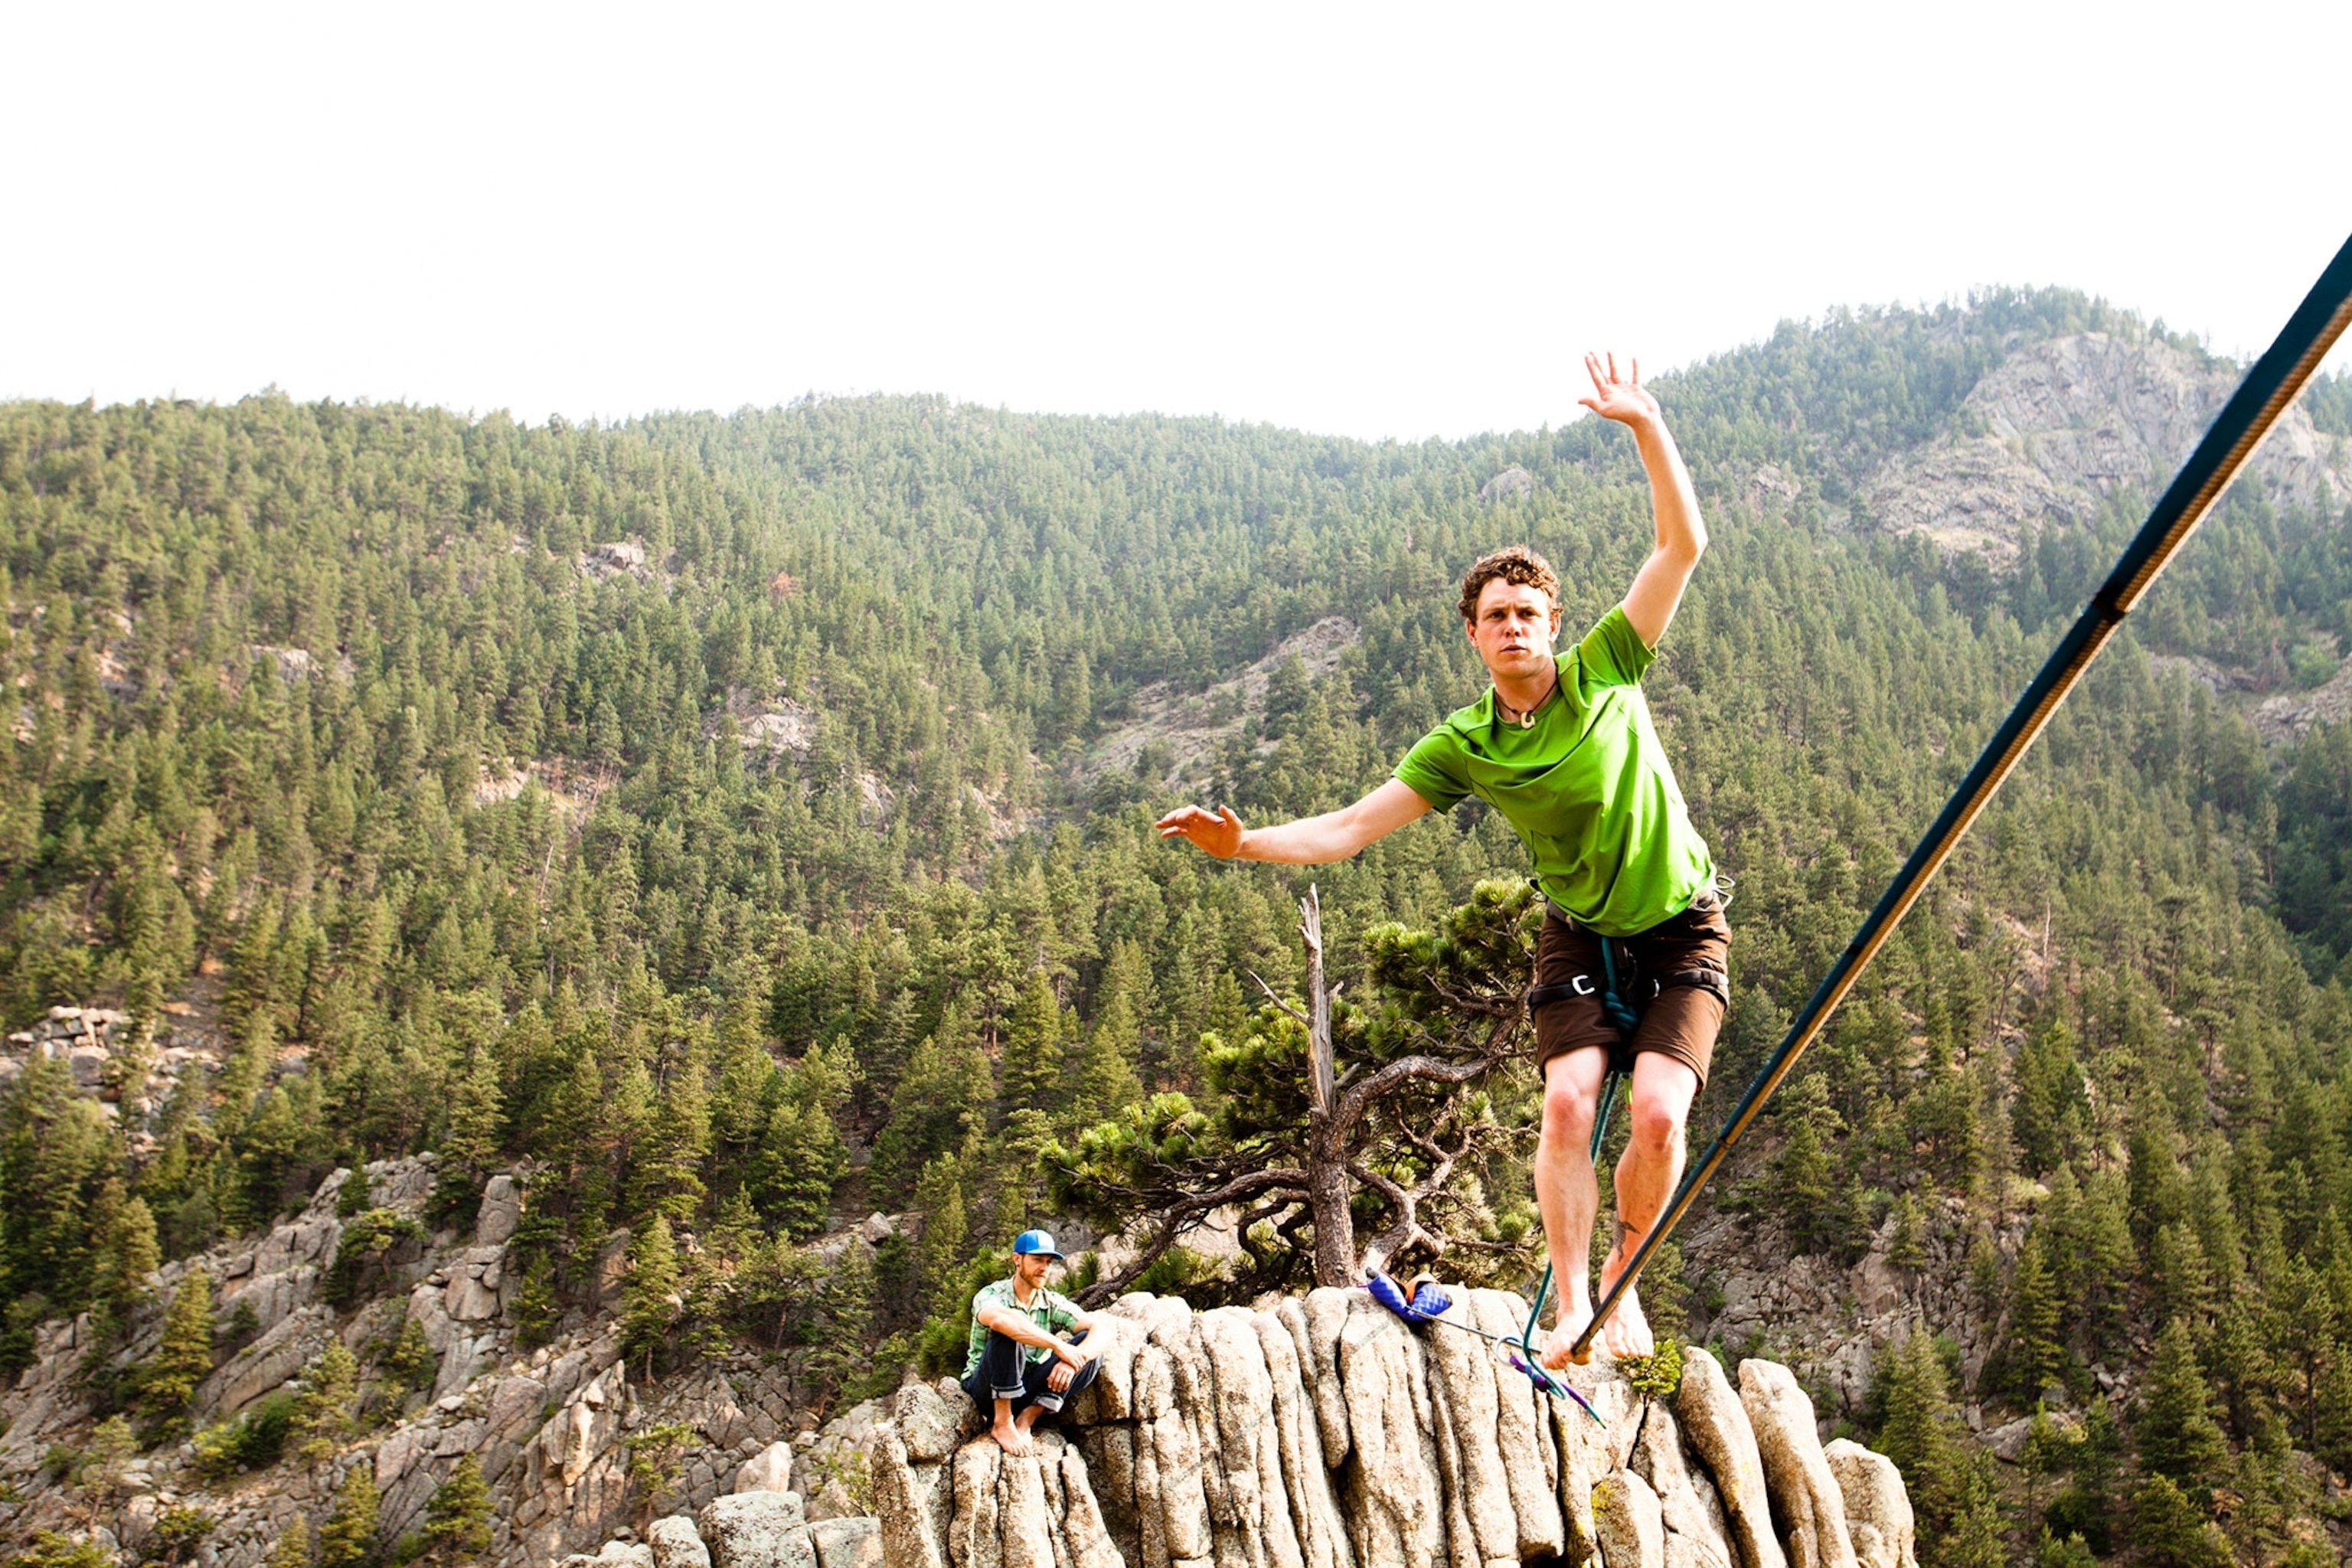 Slacklining: Canyons to slackline in the United States, Balance, Coordination. 3080x2050 HD Background.